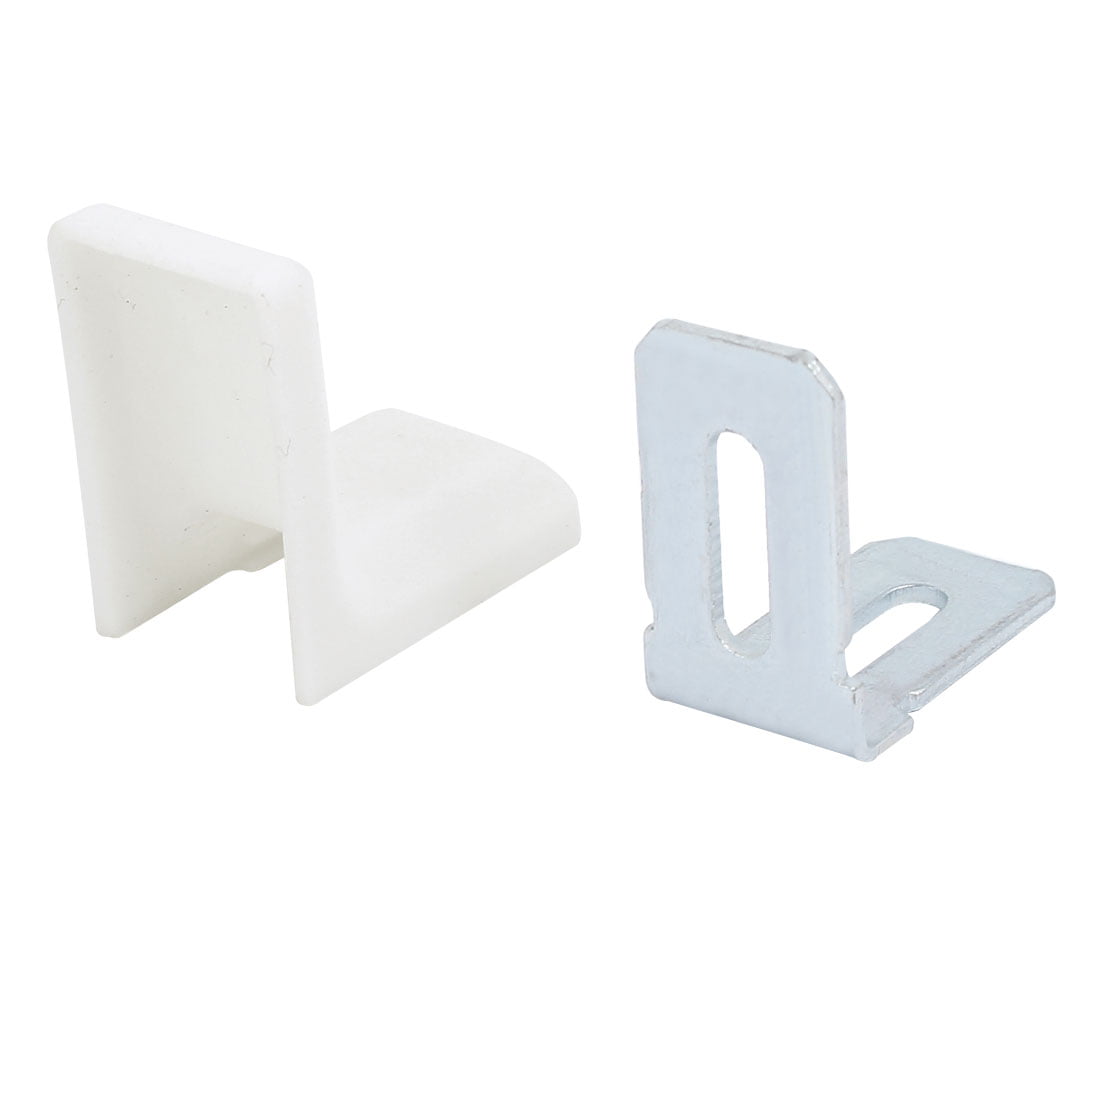 28mmx17mmx28mm Plastic L Shaped Cover Right Angle Corner